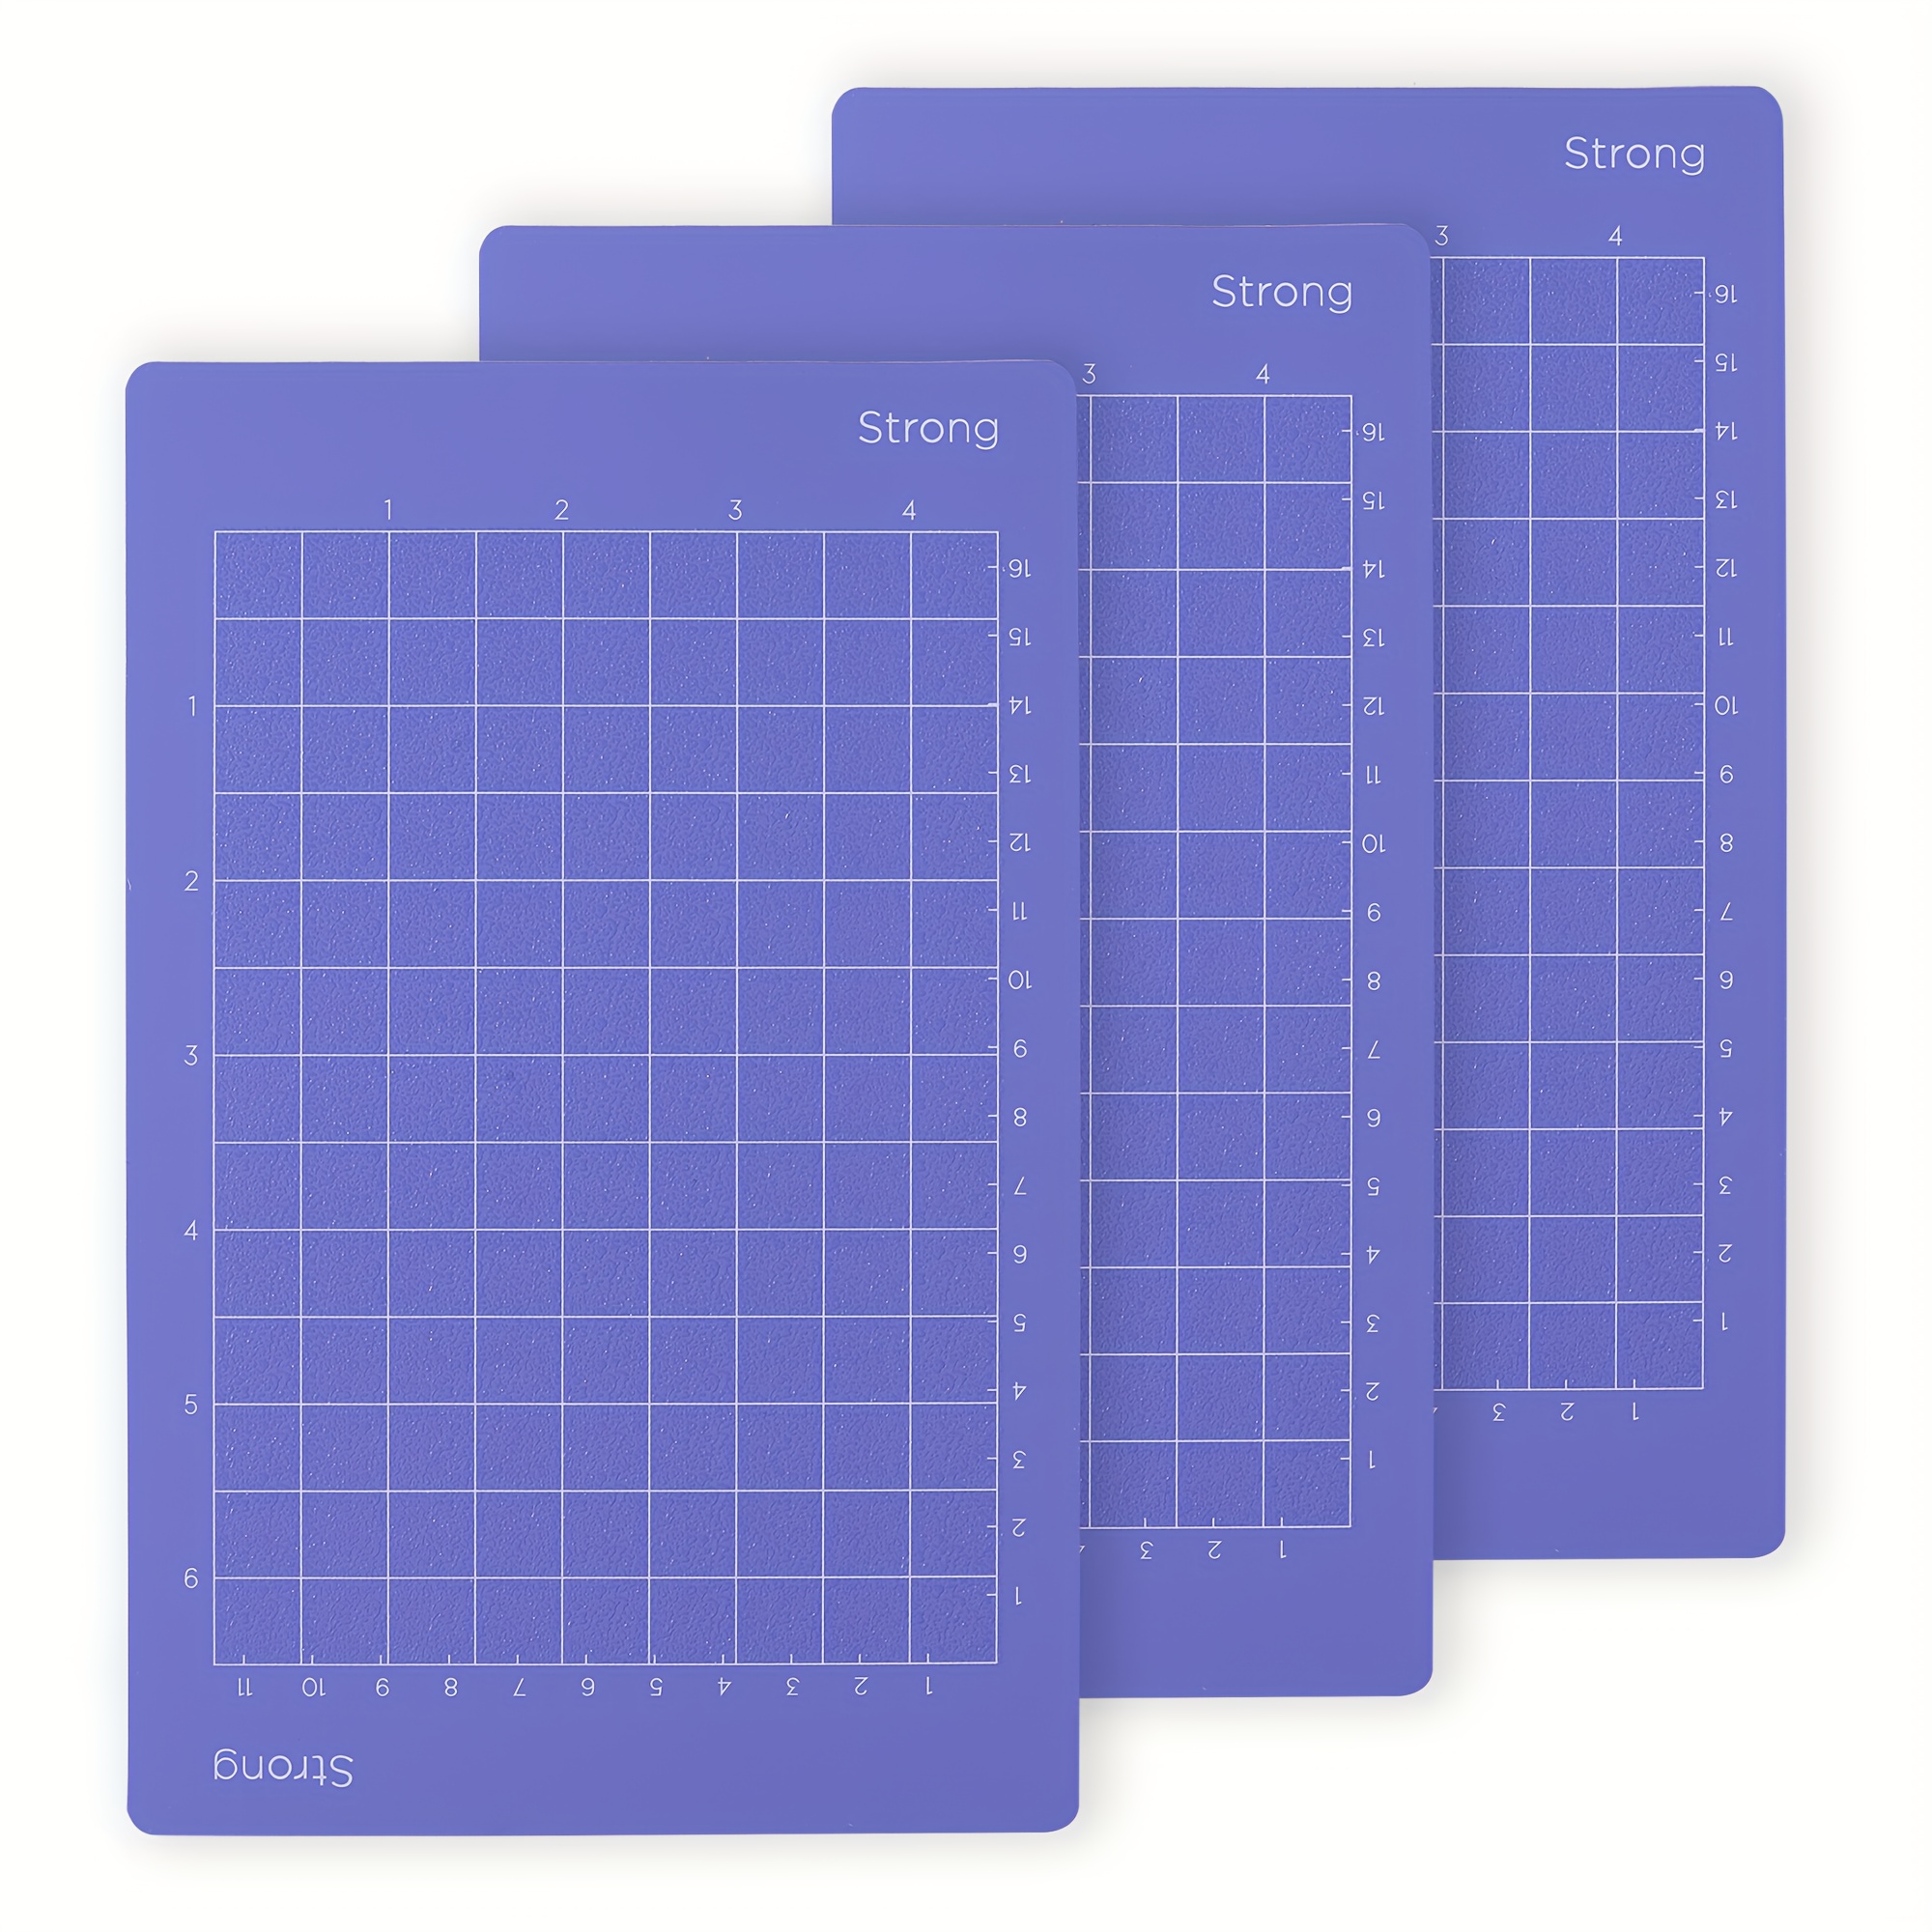 4.5x12in/4.5x6.5in Cutting Mats Variety for Cricut Joy Maker Stronggrip  Standardgrip Lightgrip Multiple Adhesive Pad Replacement